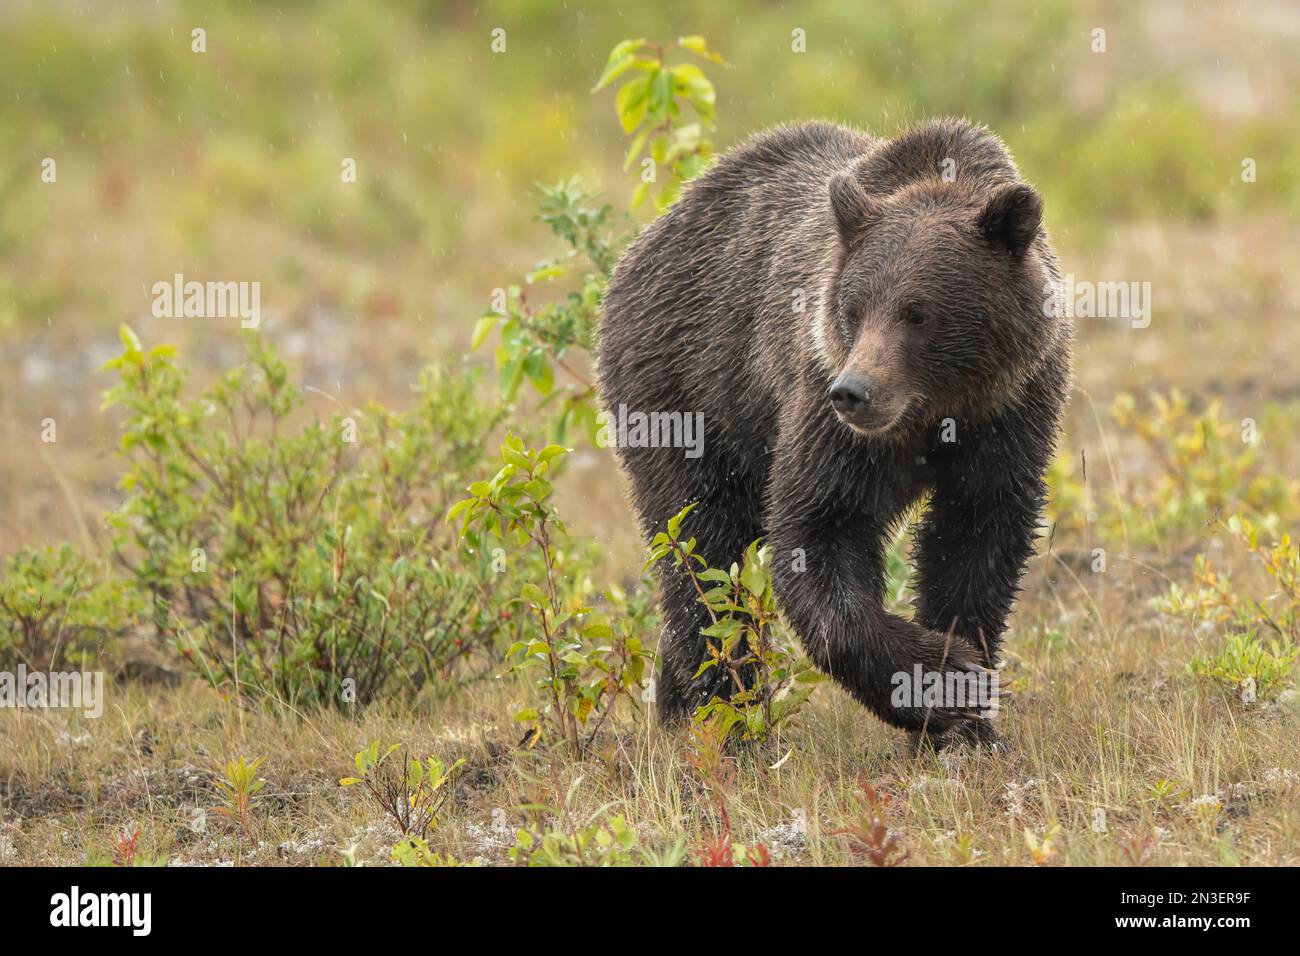 Grizzly bear (Ursus arctos horribilis) walking through field looking for berries and roots; Haines Junction, Yukon, Canada Stock Photo